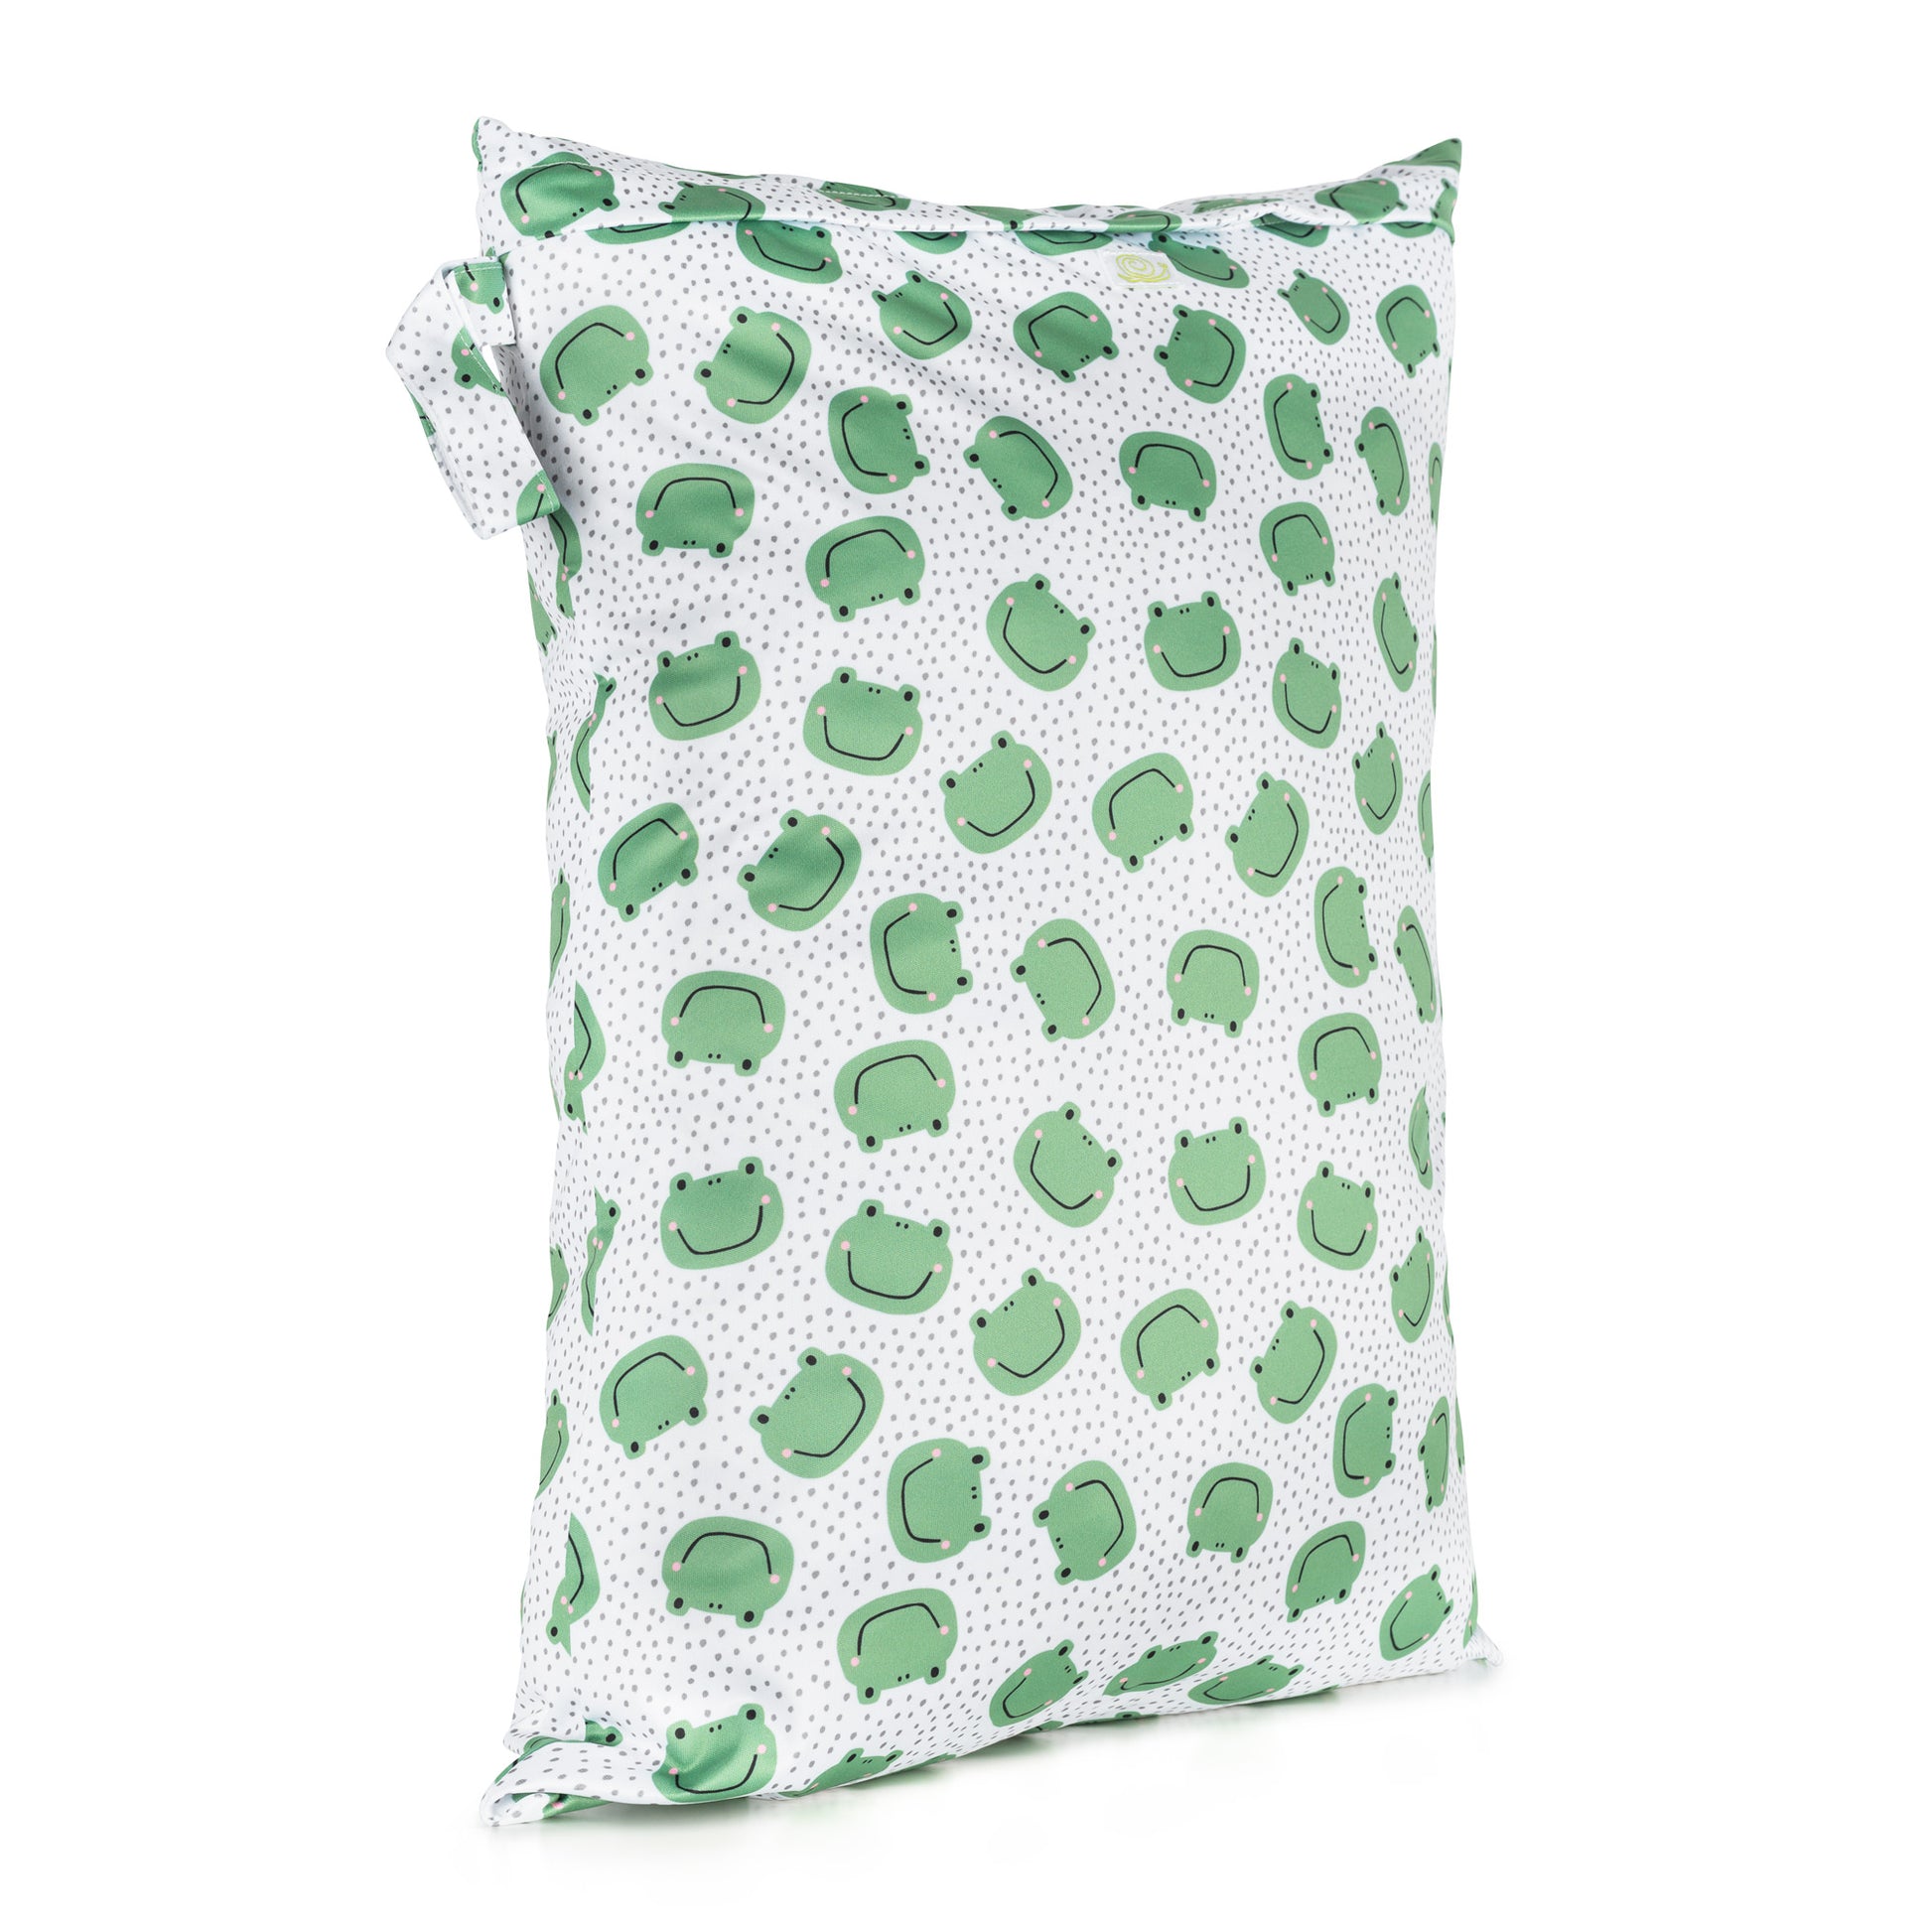 Large Wet Bag with Frog print